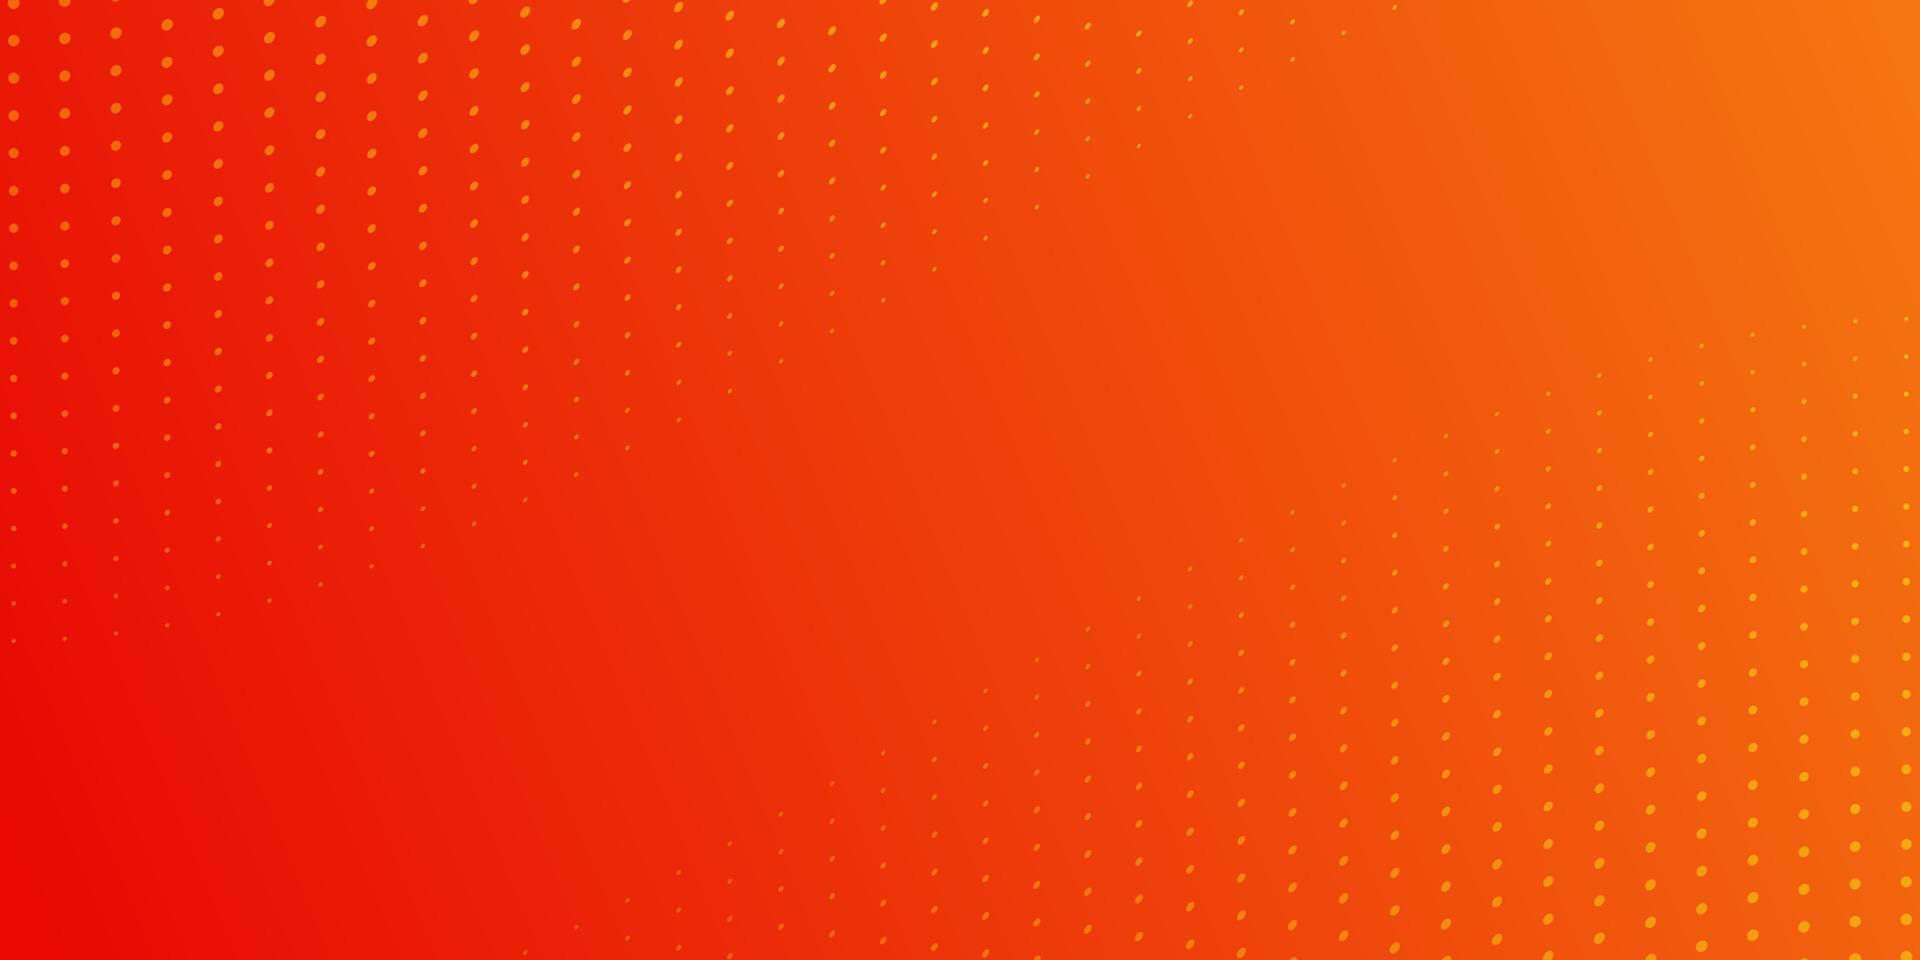 Orange Abstract Halftone Background. Light Wave Dotted Creative Banner. Bright Half Tone Texture with Vibrant Effect Pattern. Abstract Modern Wallpaper Design. Vector Illustration.